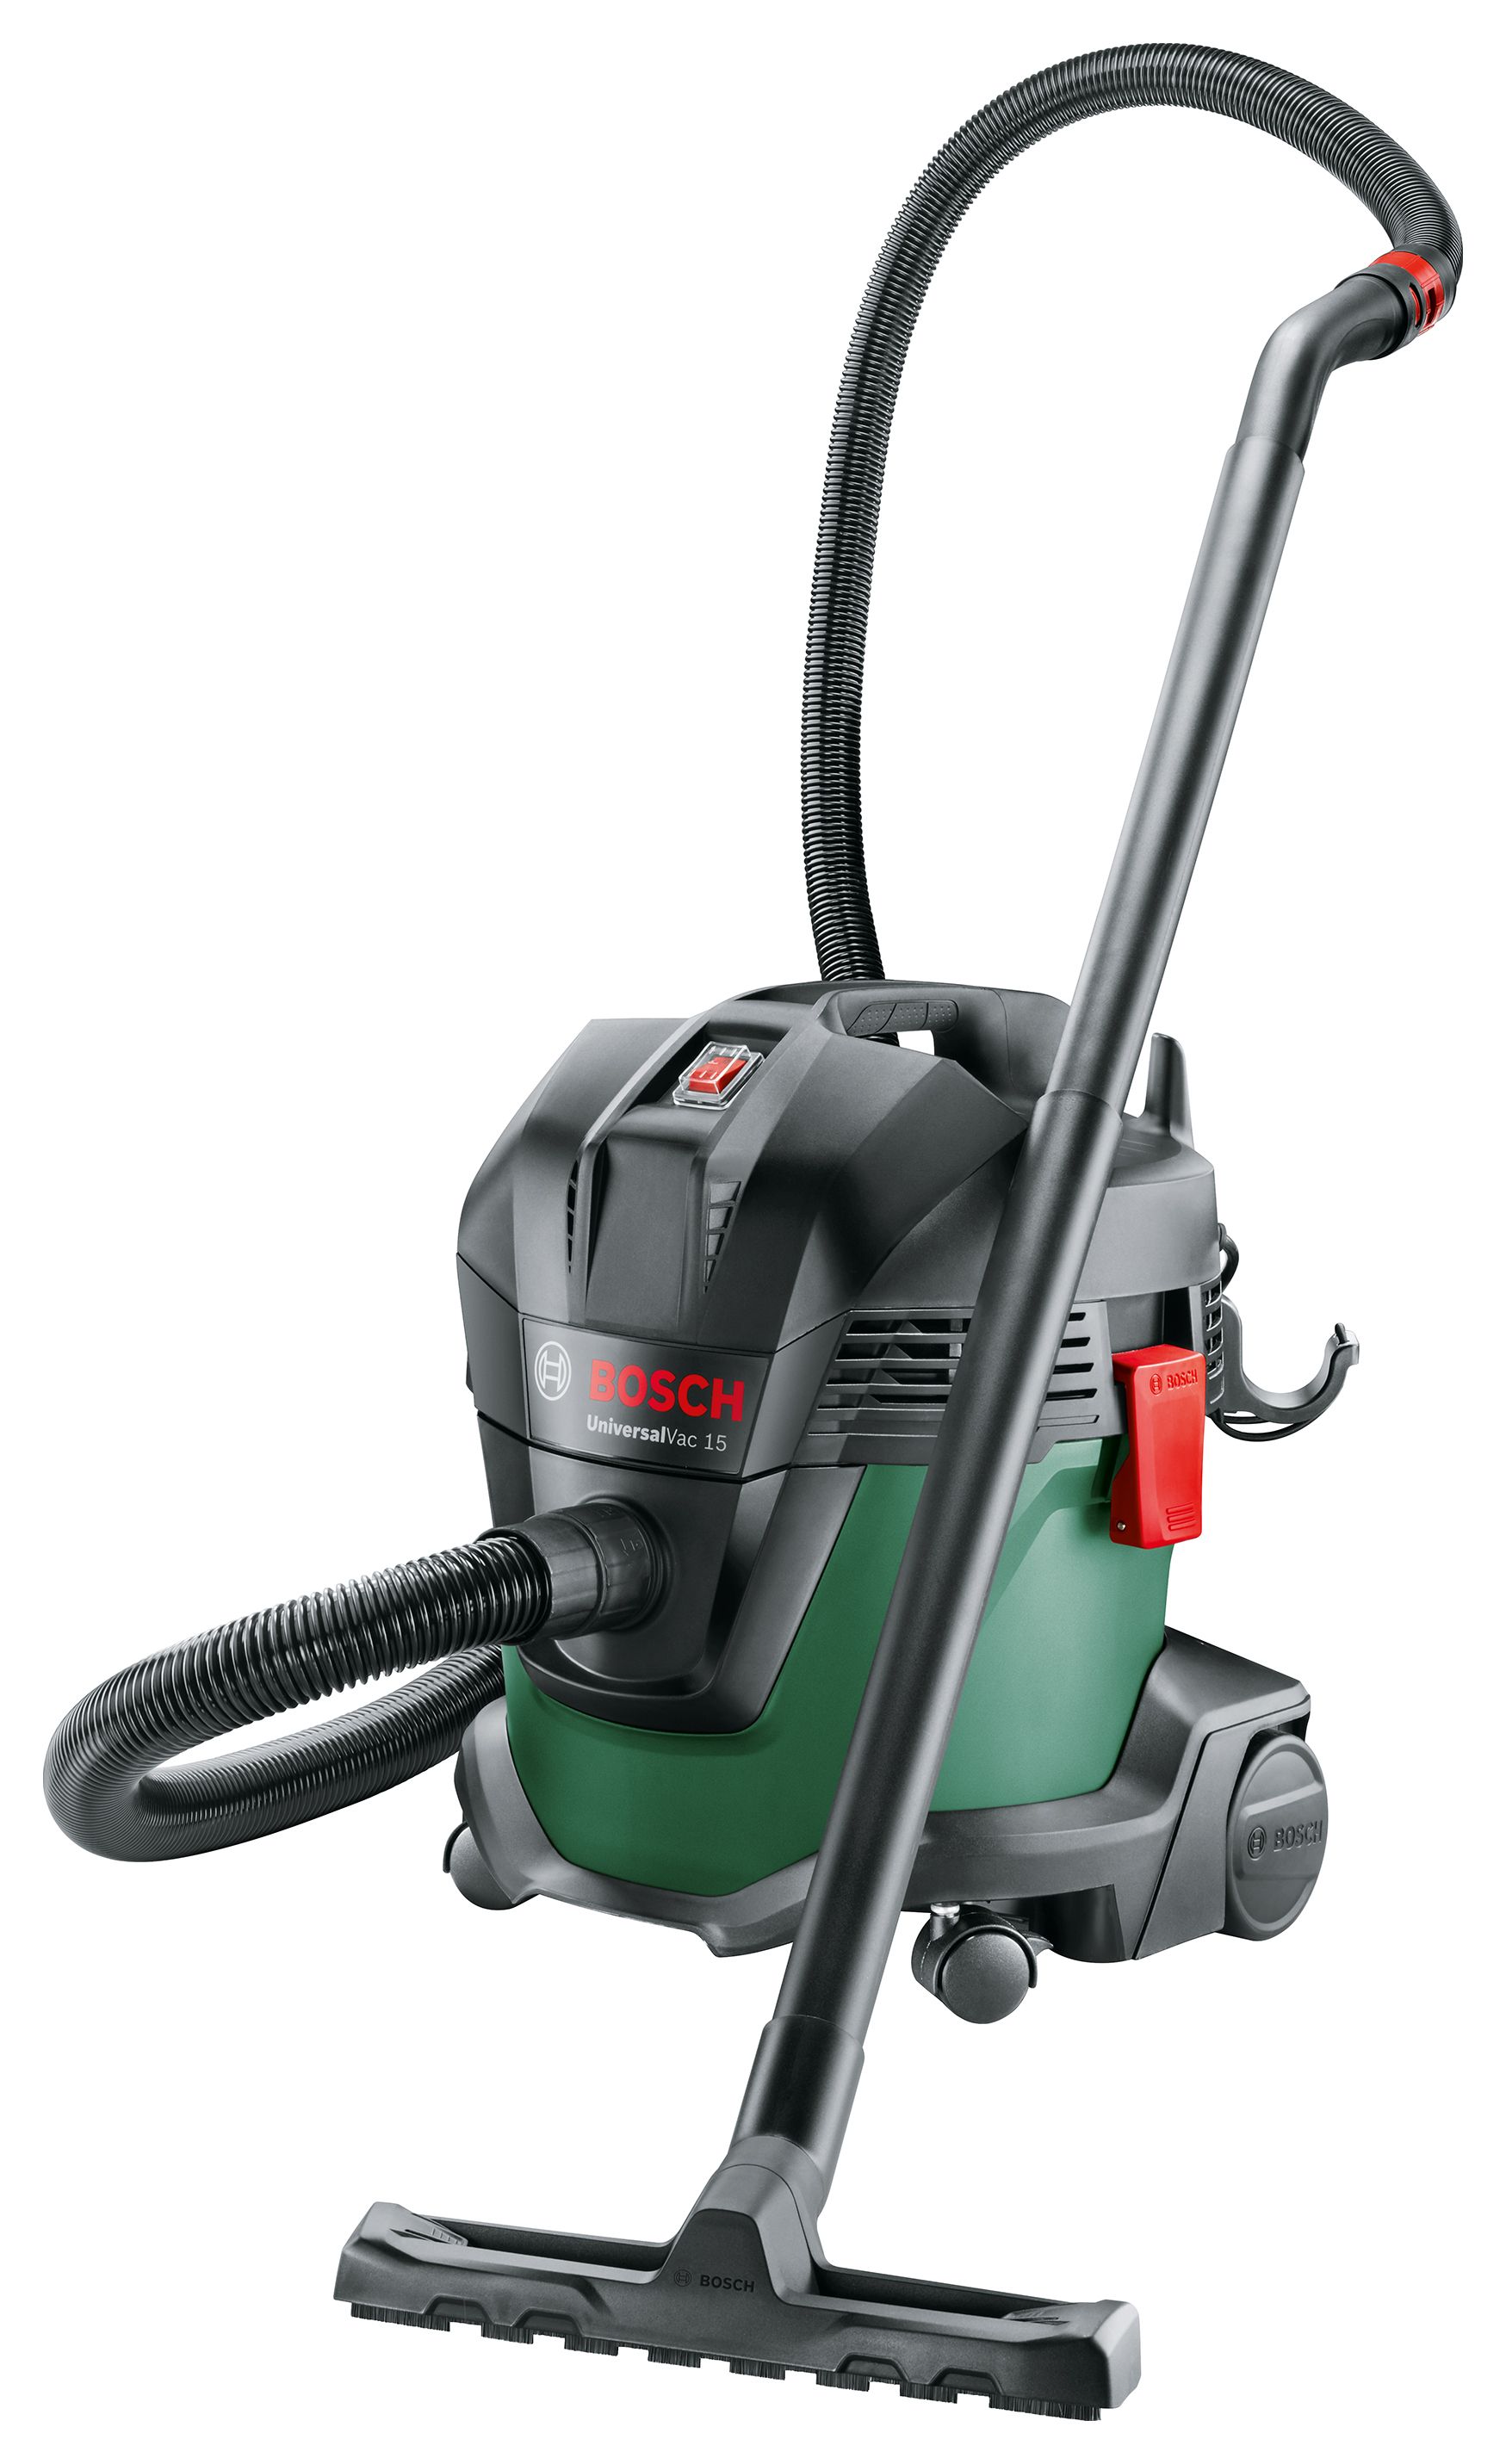 Image of Bosch Universalvac 15 Corded Wet And Dry Vacuum Cleaner 15l - 1000w